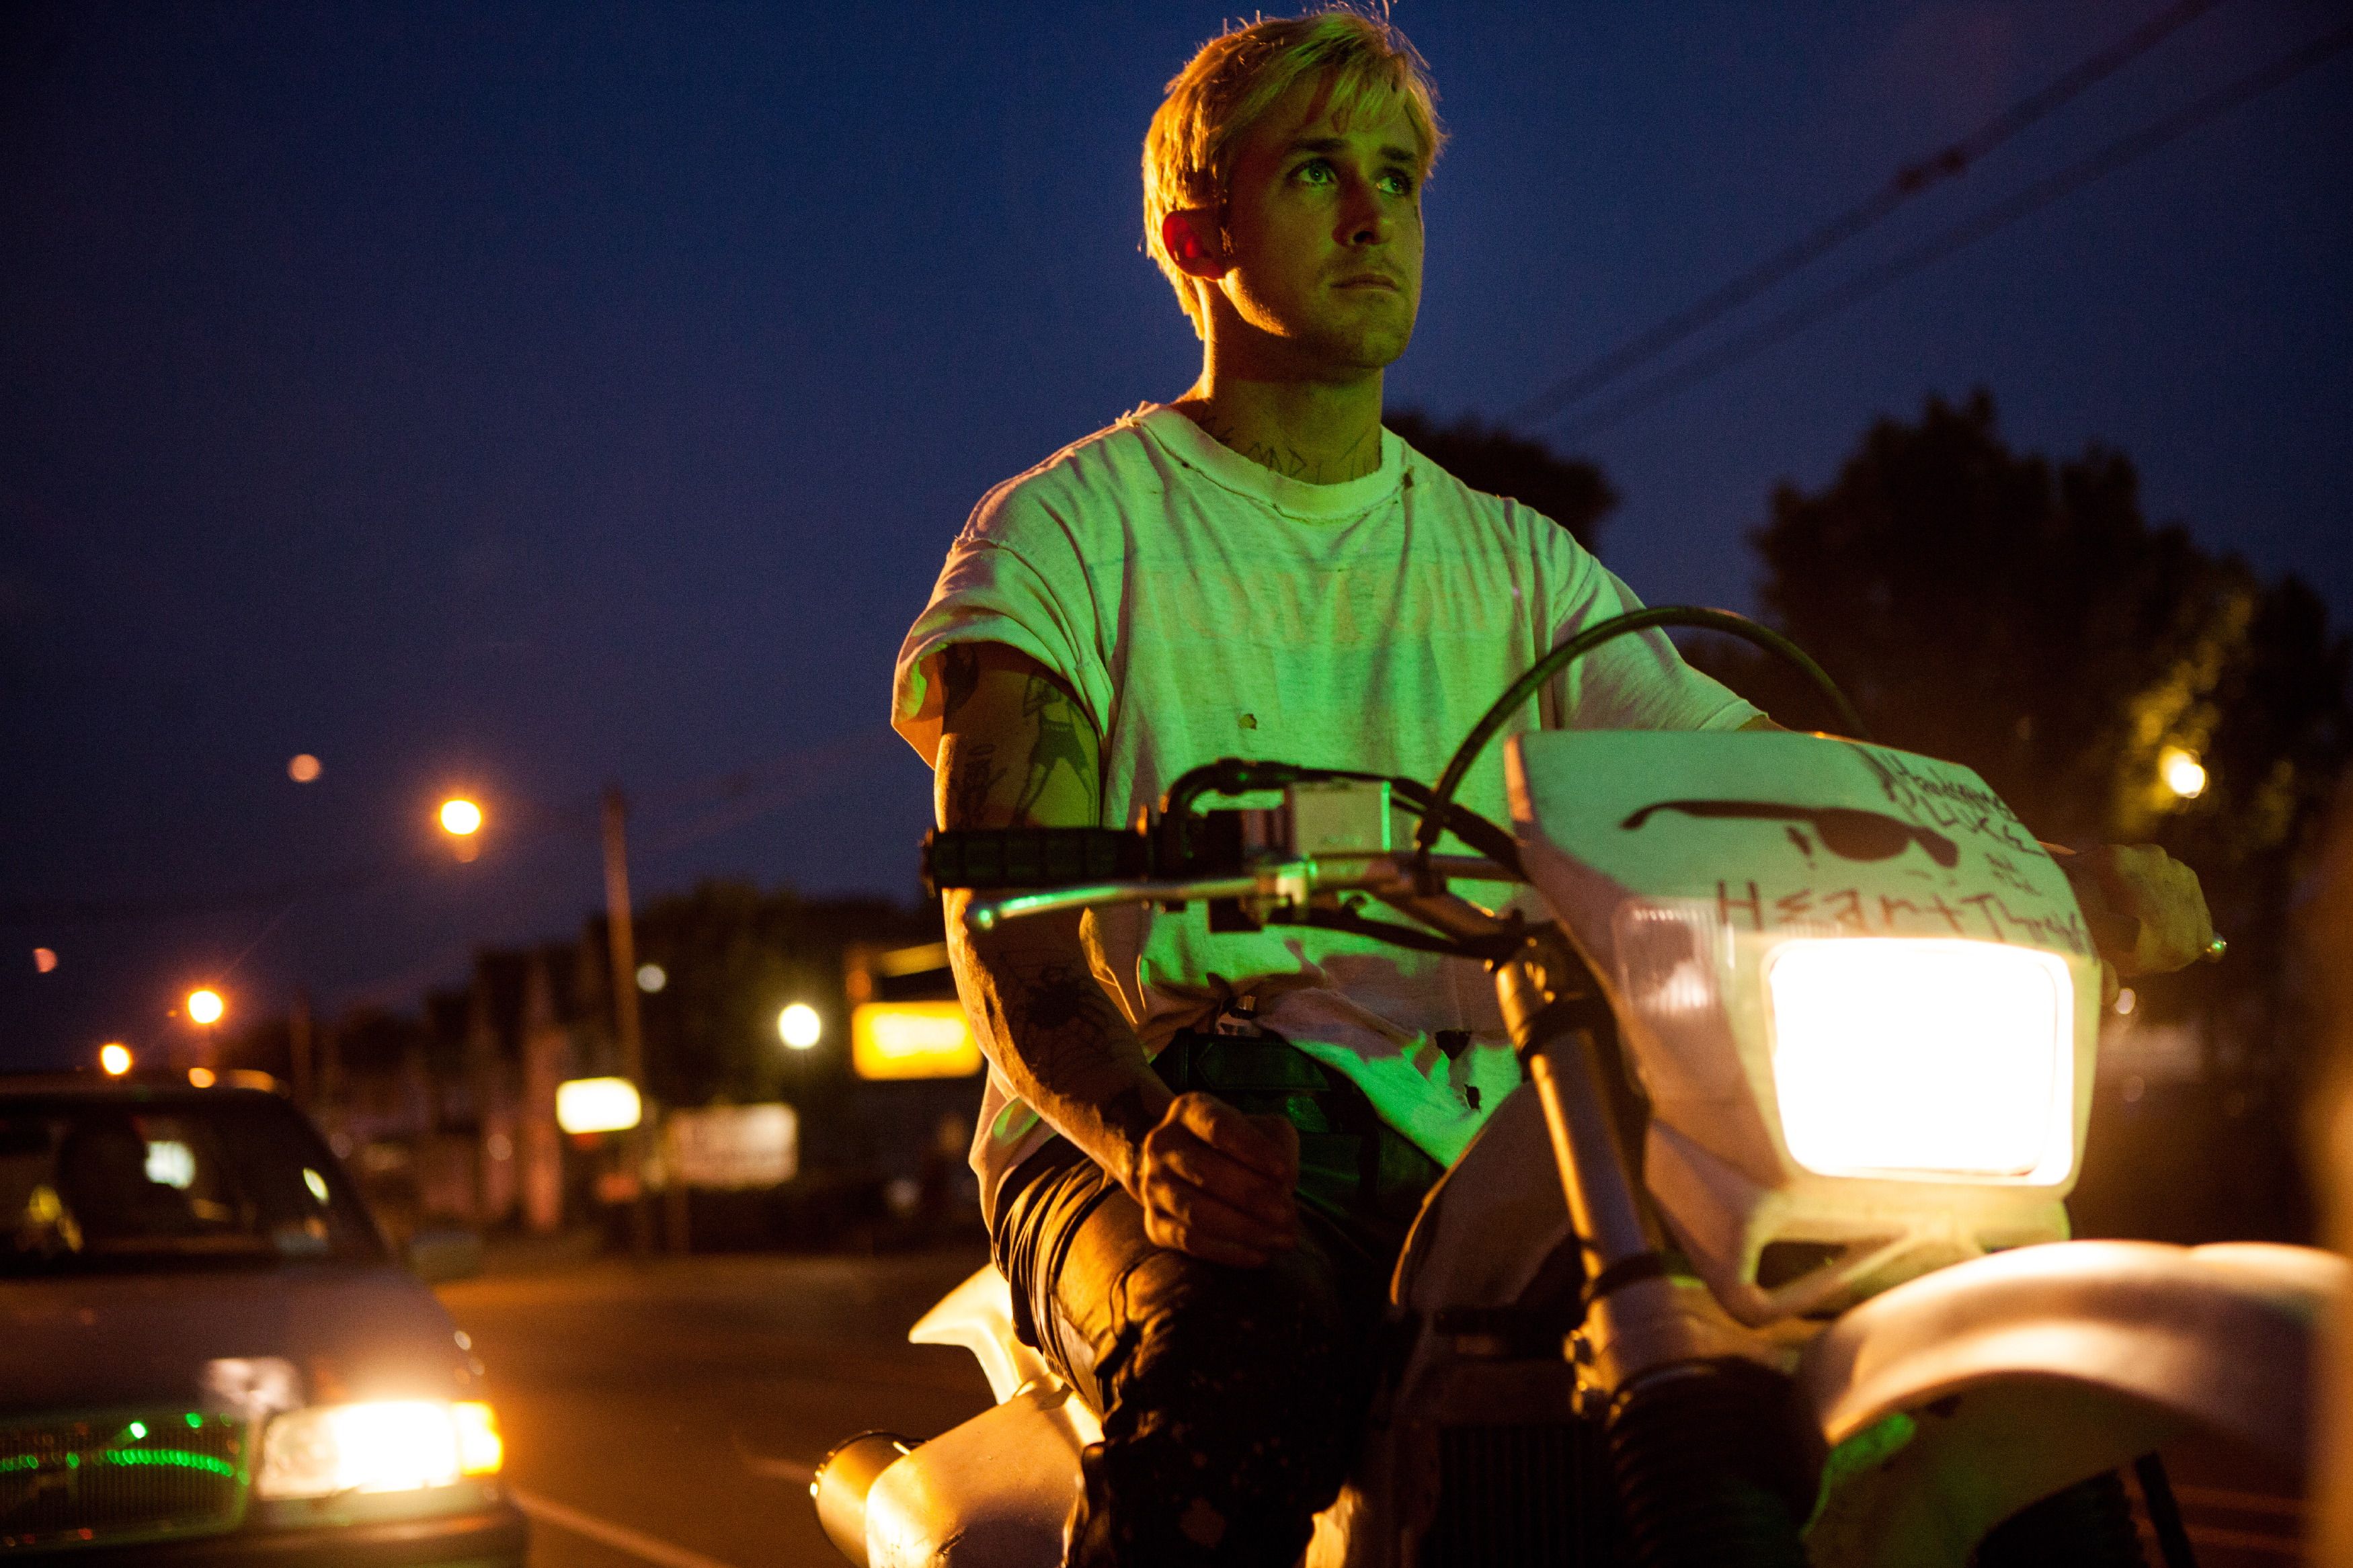 The Place Beyond the Pines Photo 1